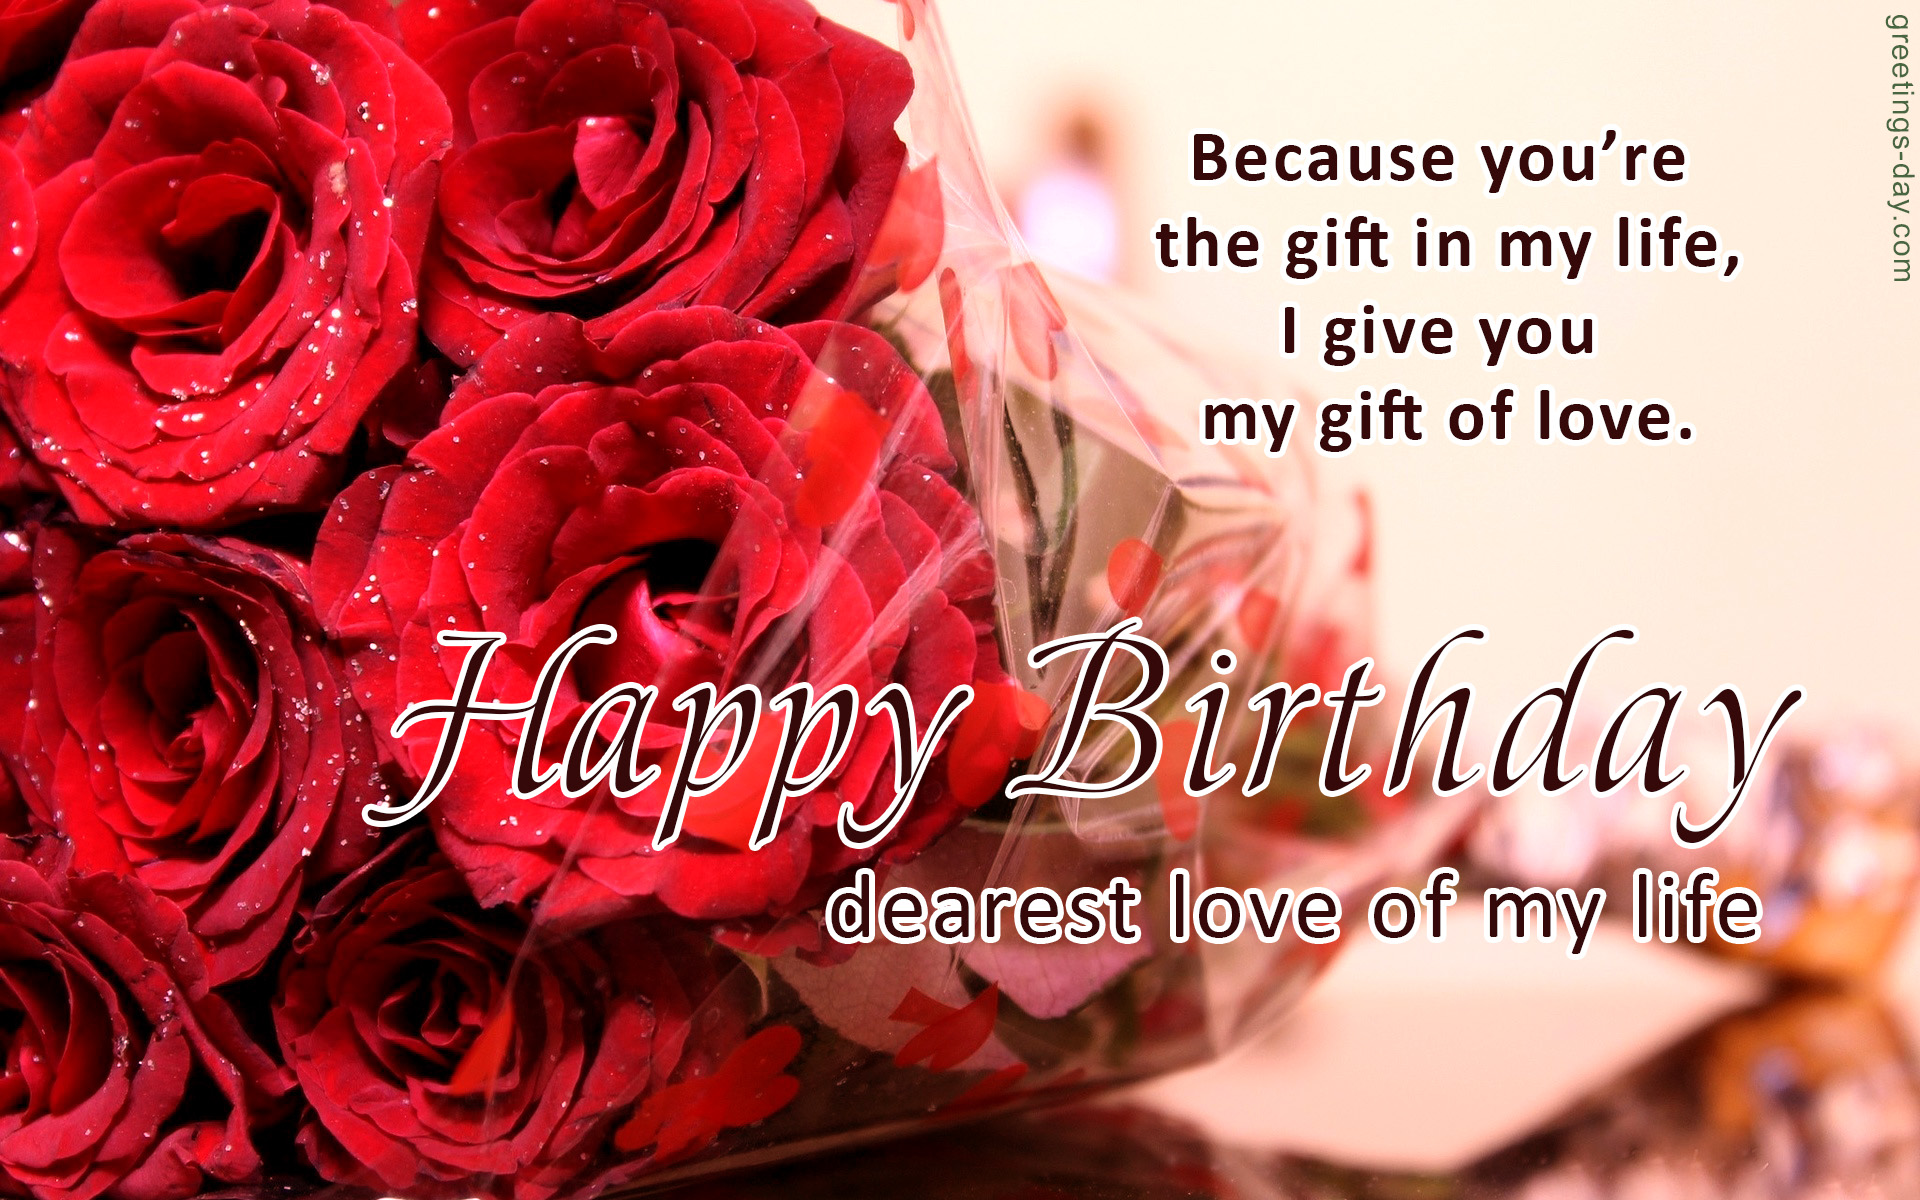 Sweet Birthday Wishes and Greetings for Loved One.